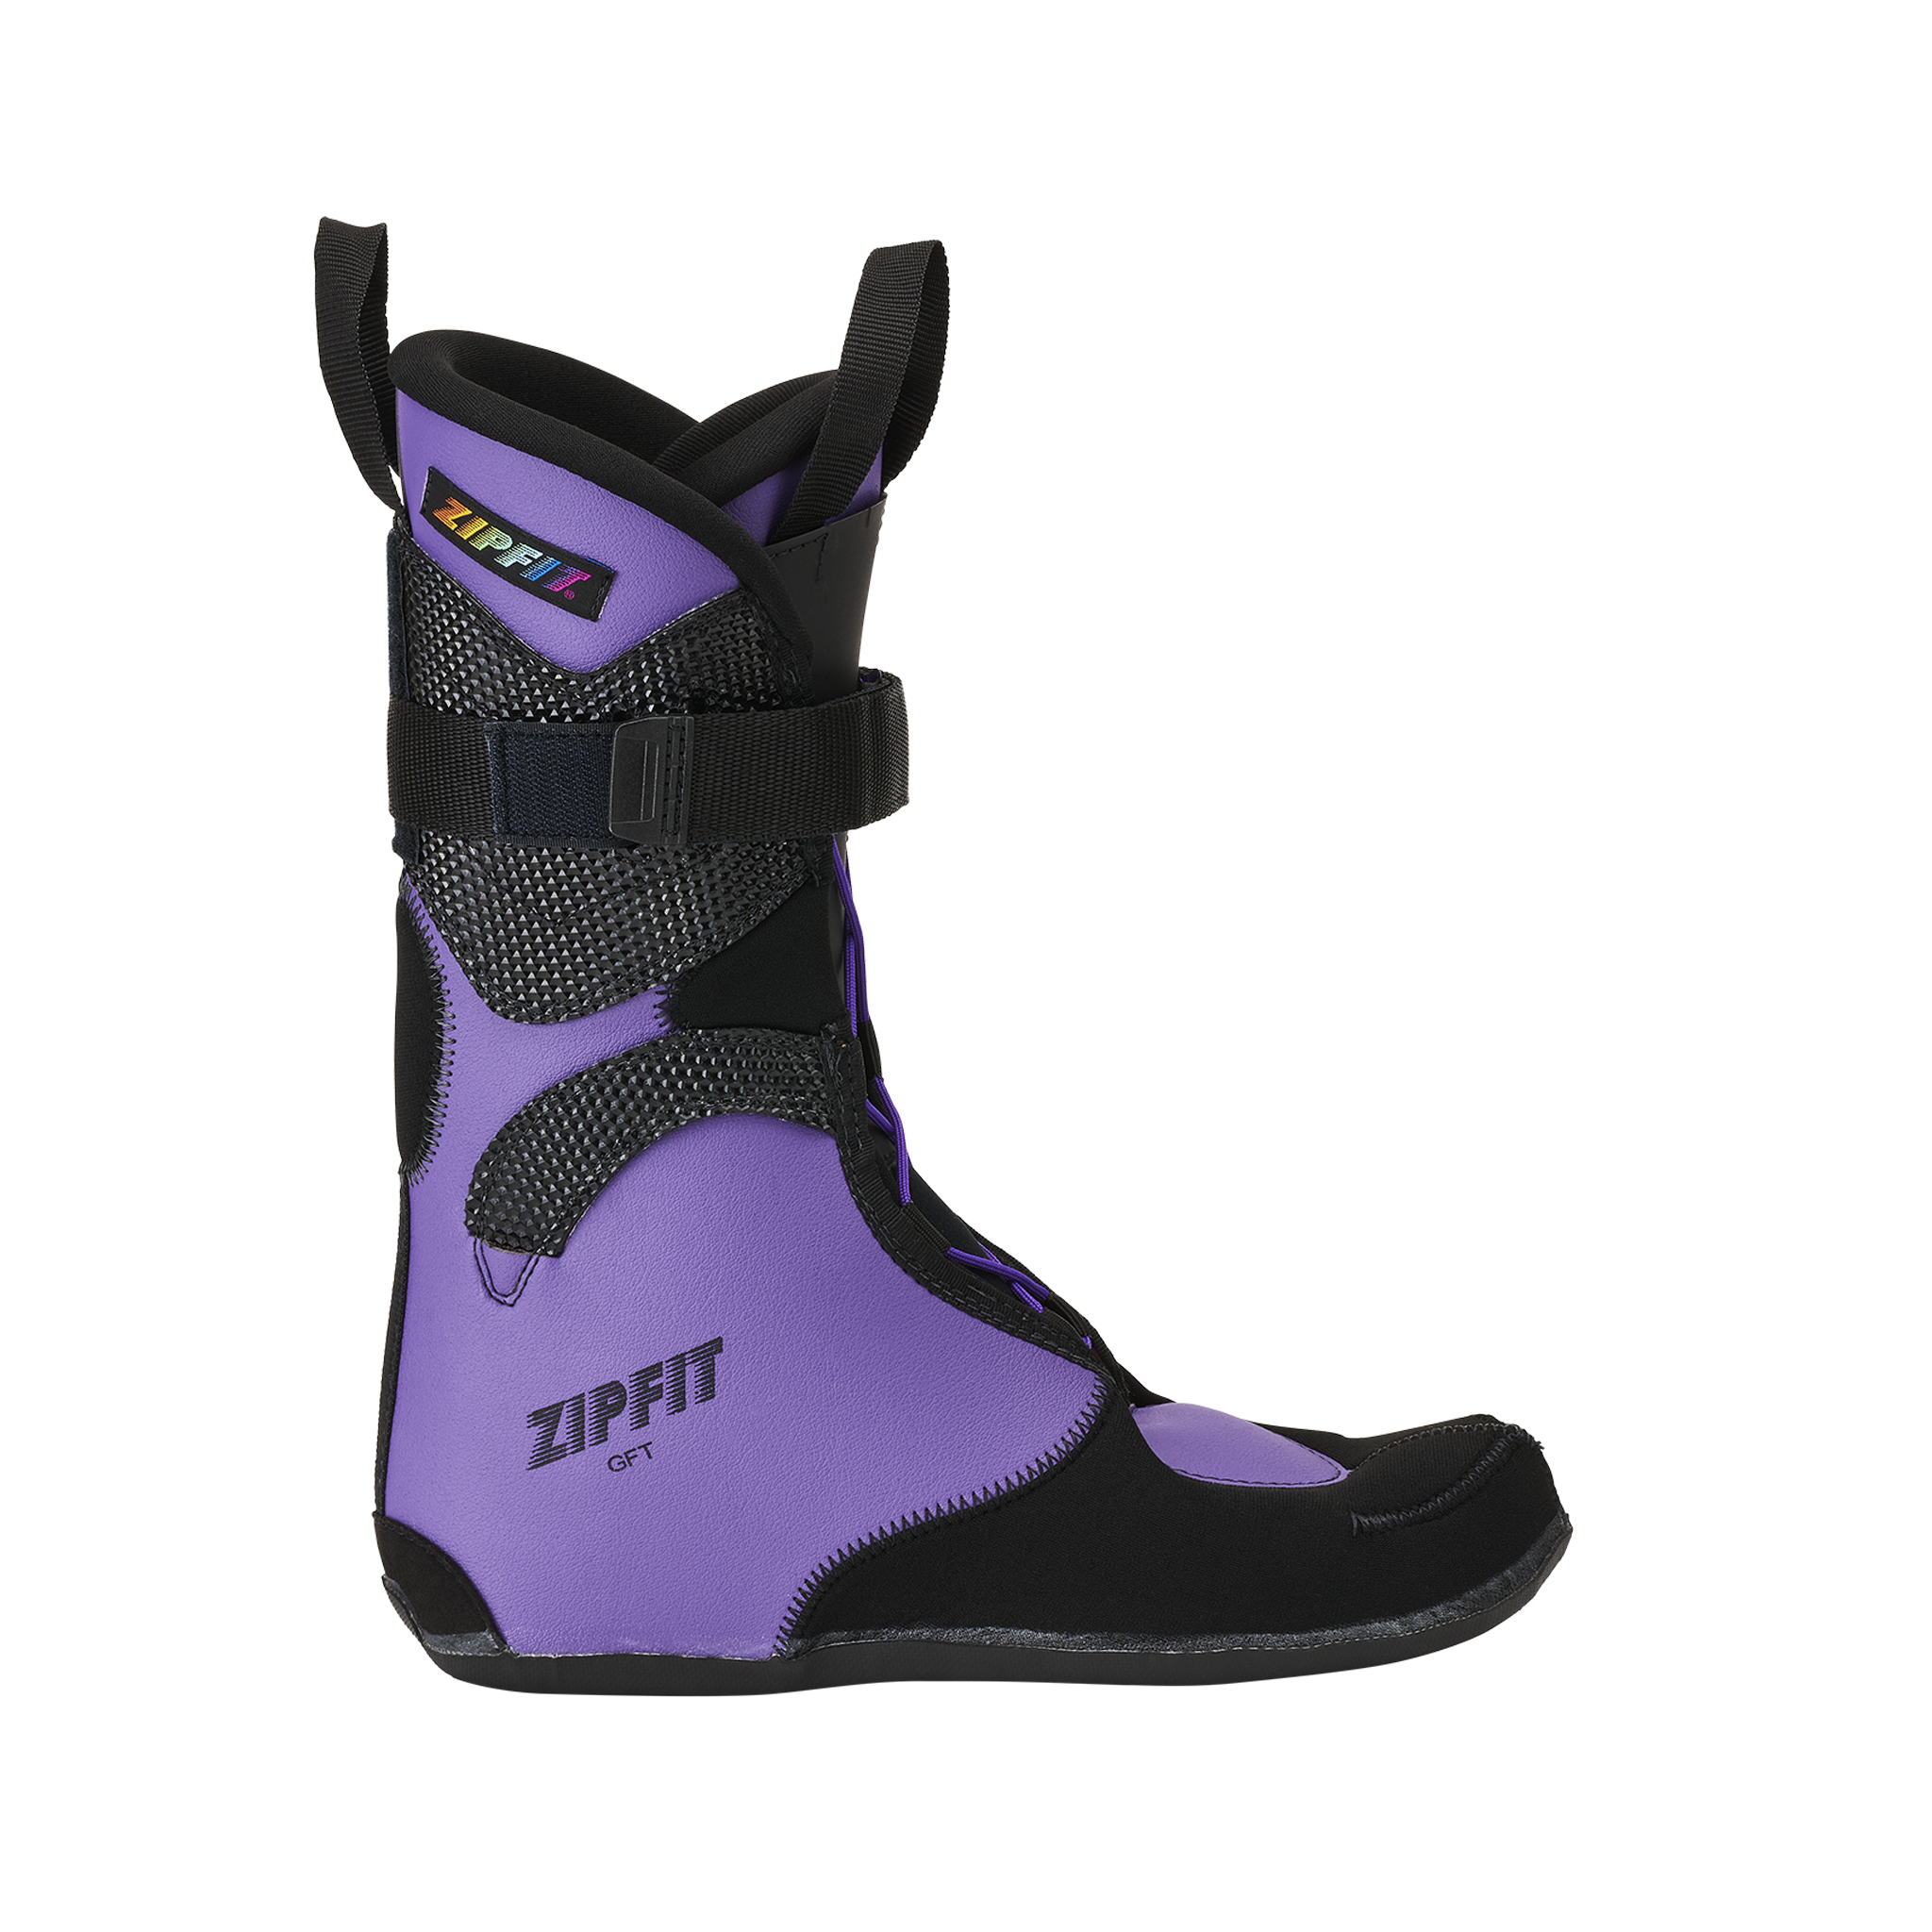 GFT - ZipFit - Ski Boot Liners for Touring